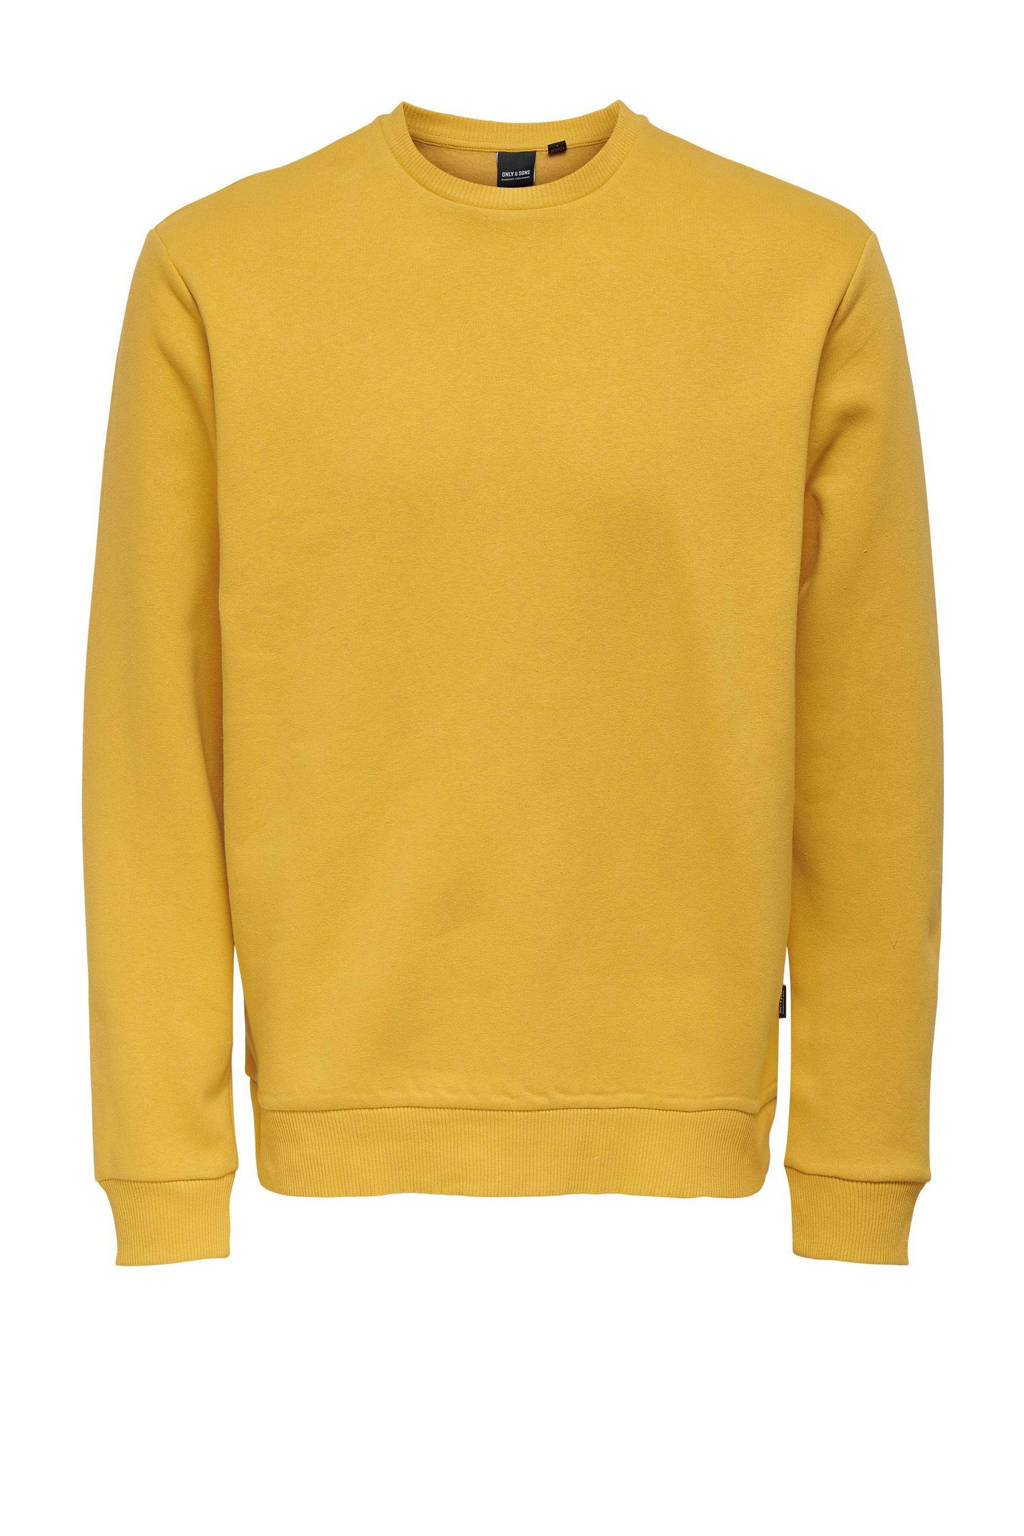 ONLY & SONS sweater ONSCERES narcissus